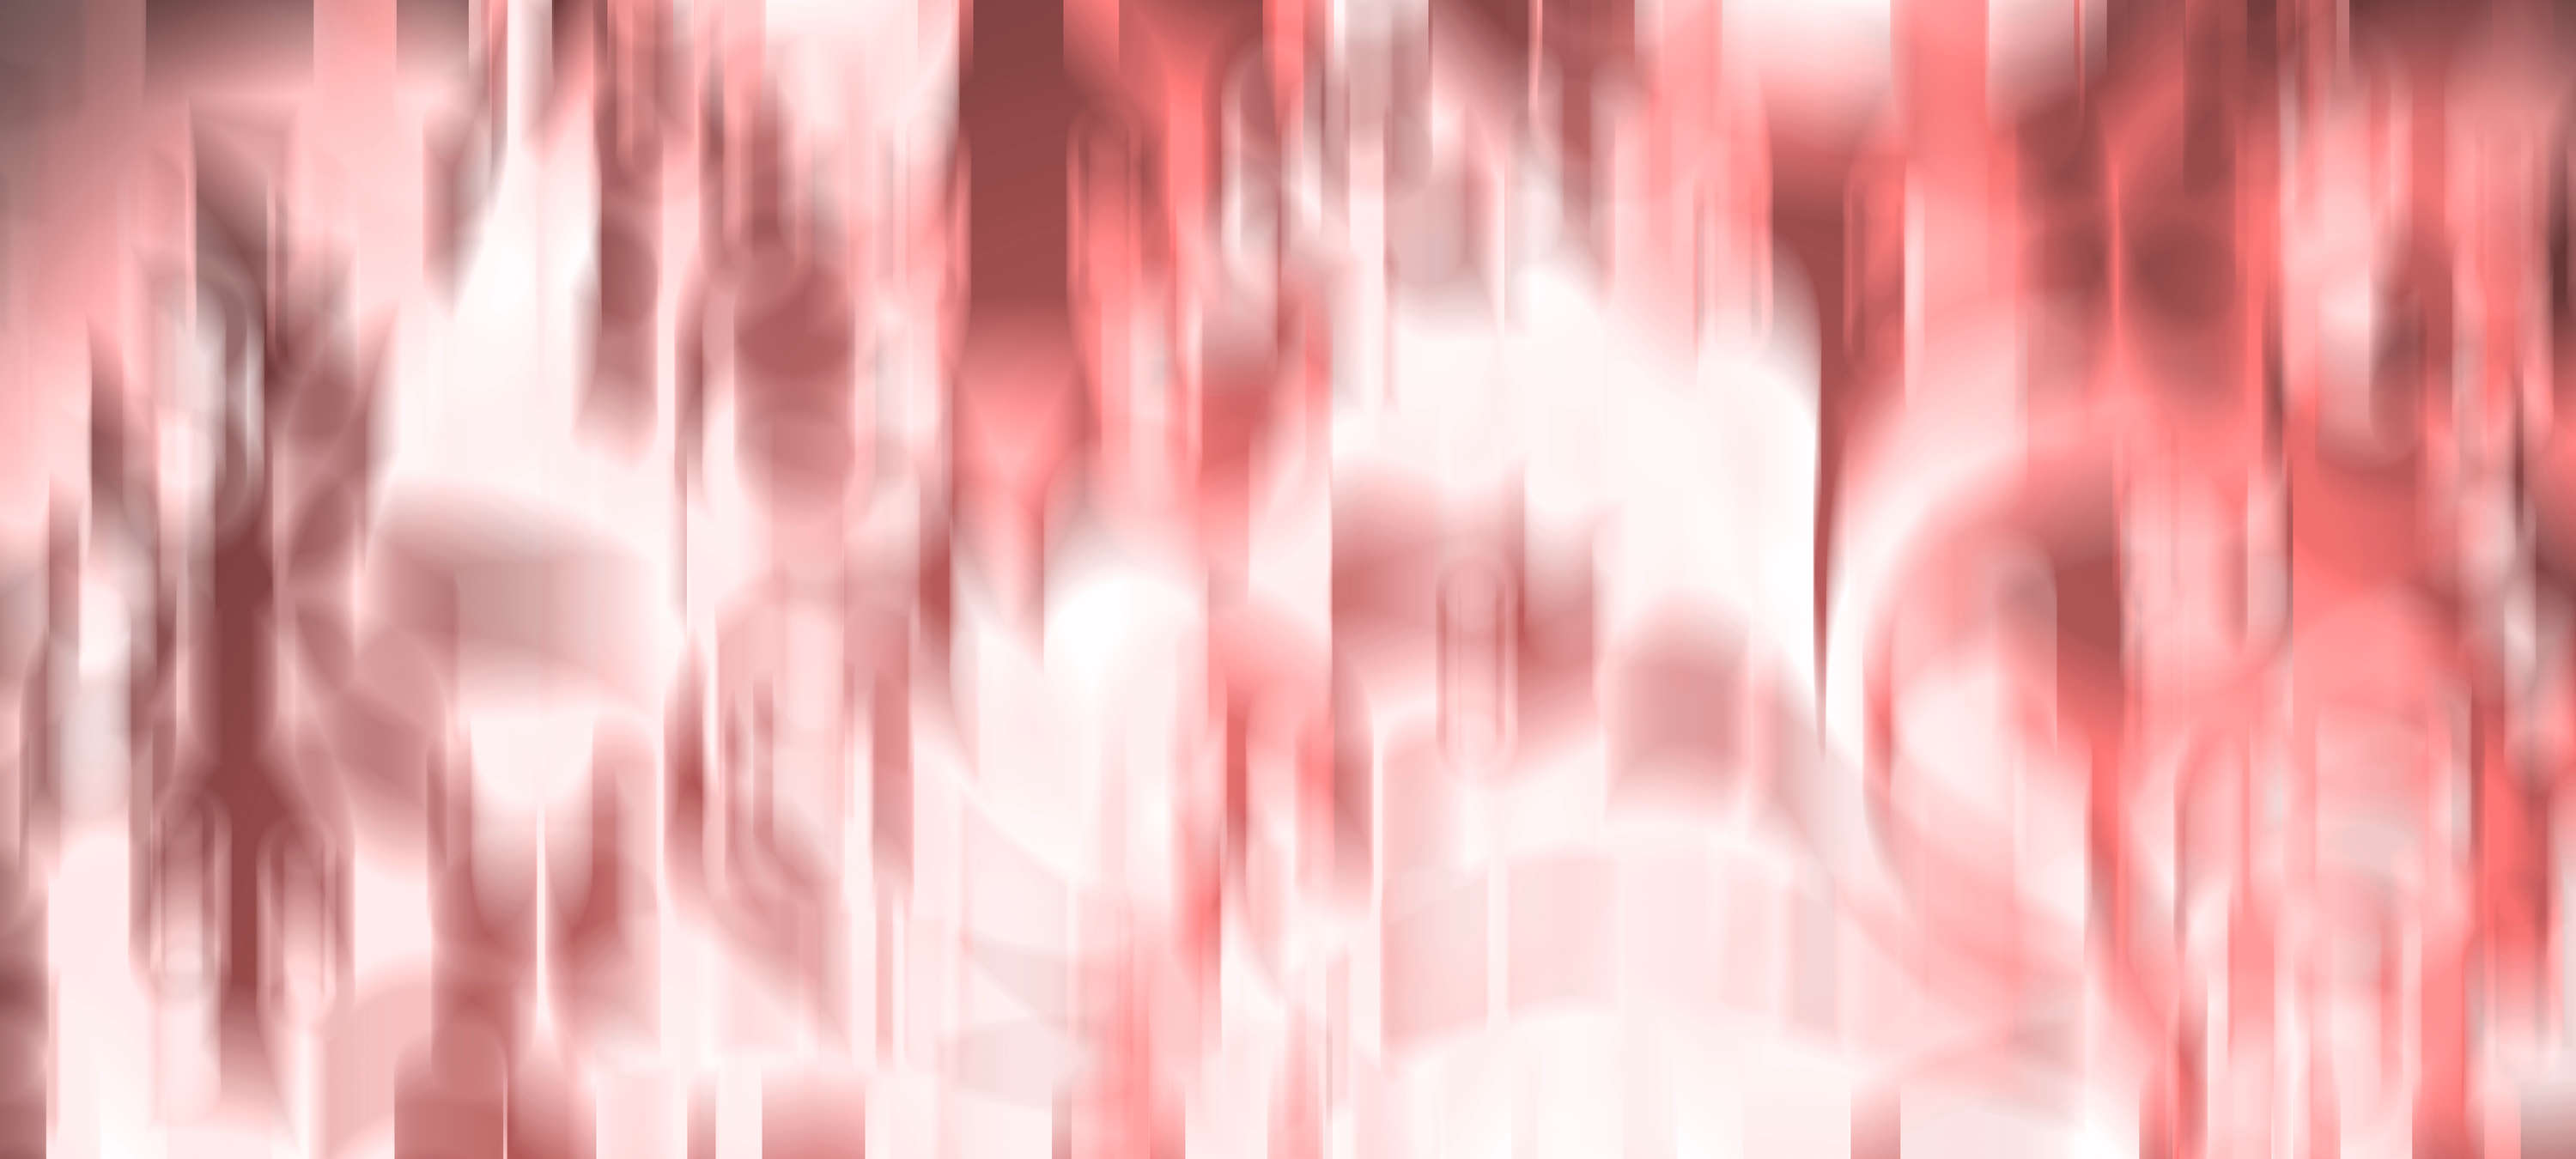             Modern wall mural abstract & blurred design - pink, red, white
        